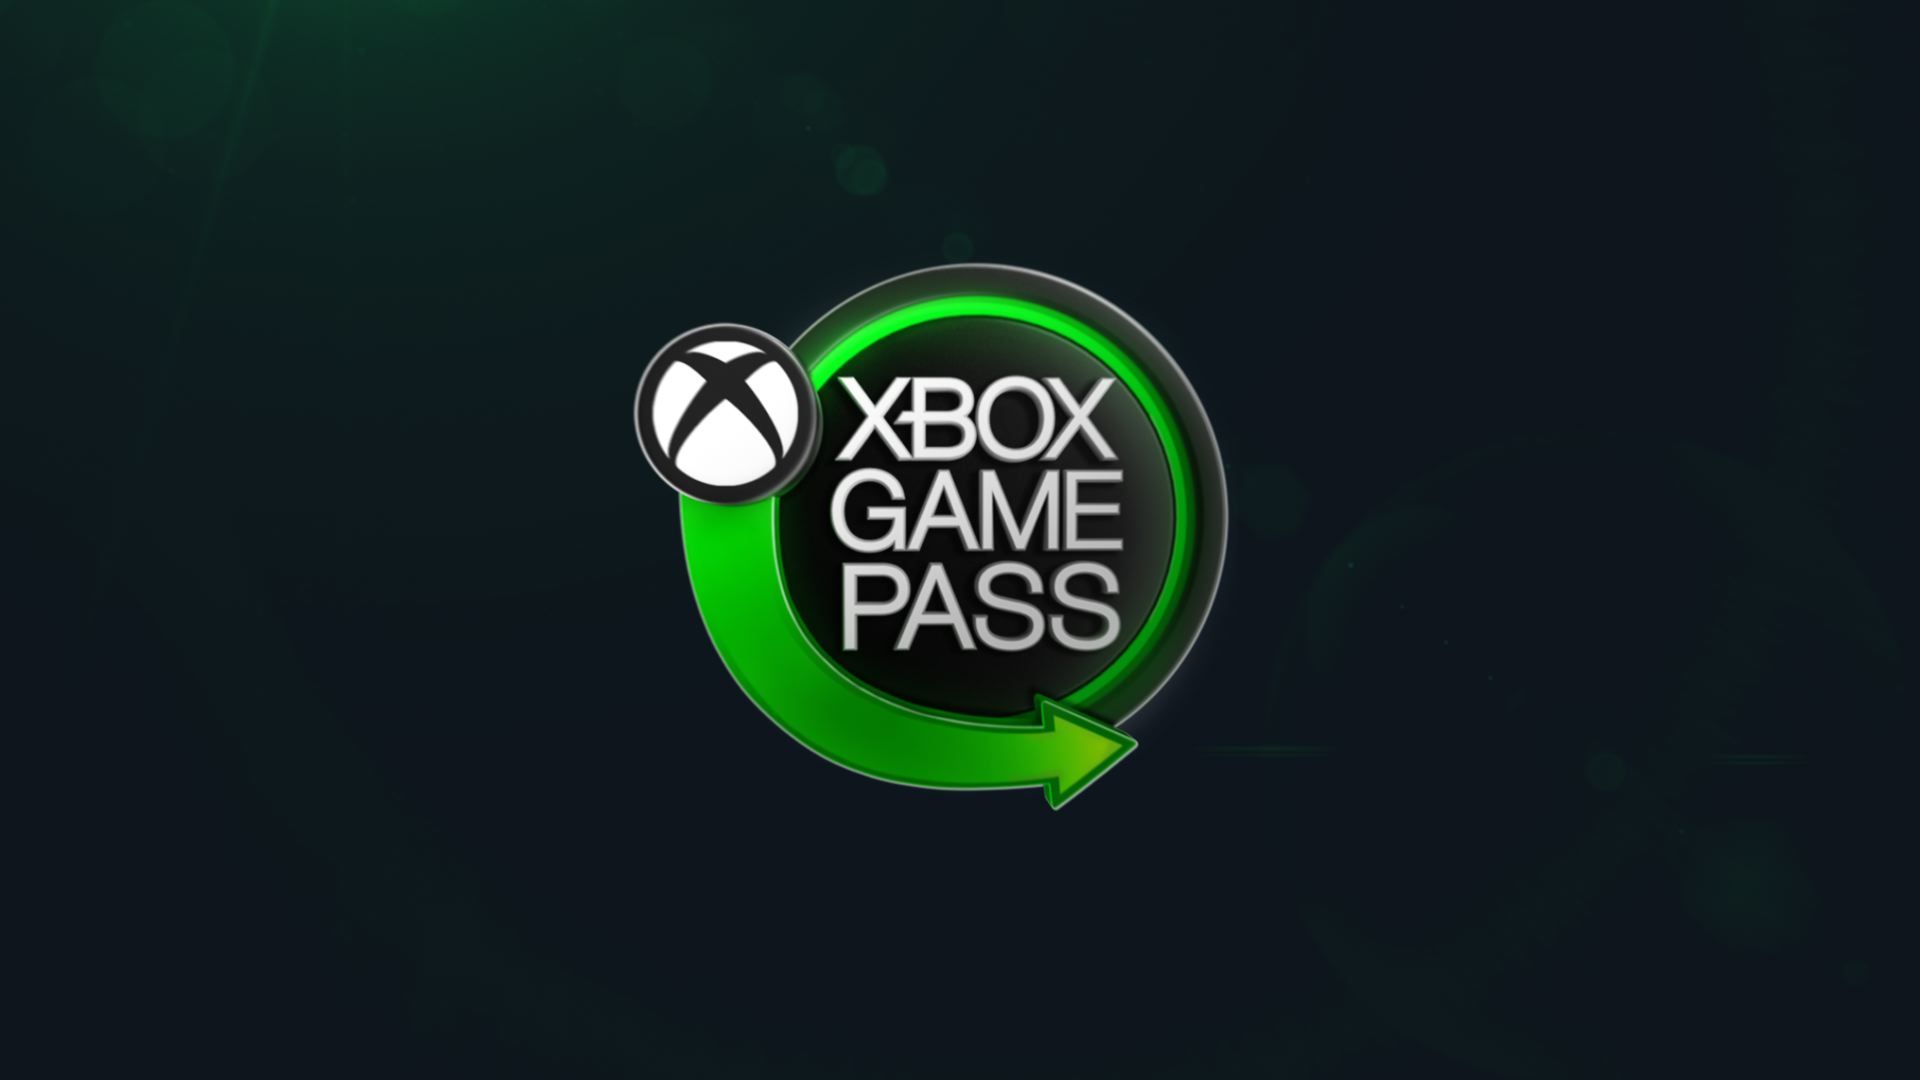 Xbox Game Pass Core to replace Xbox Live Gold soon – report